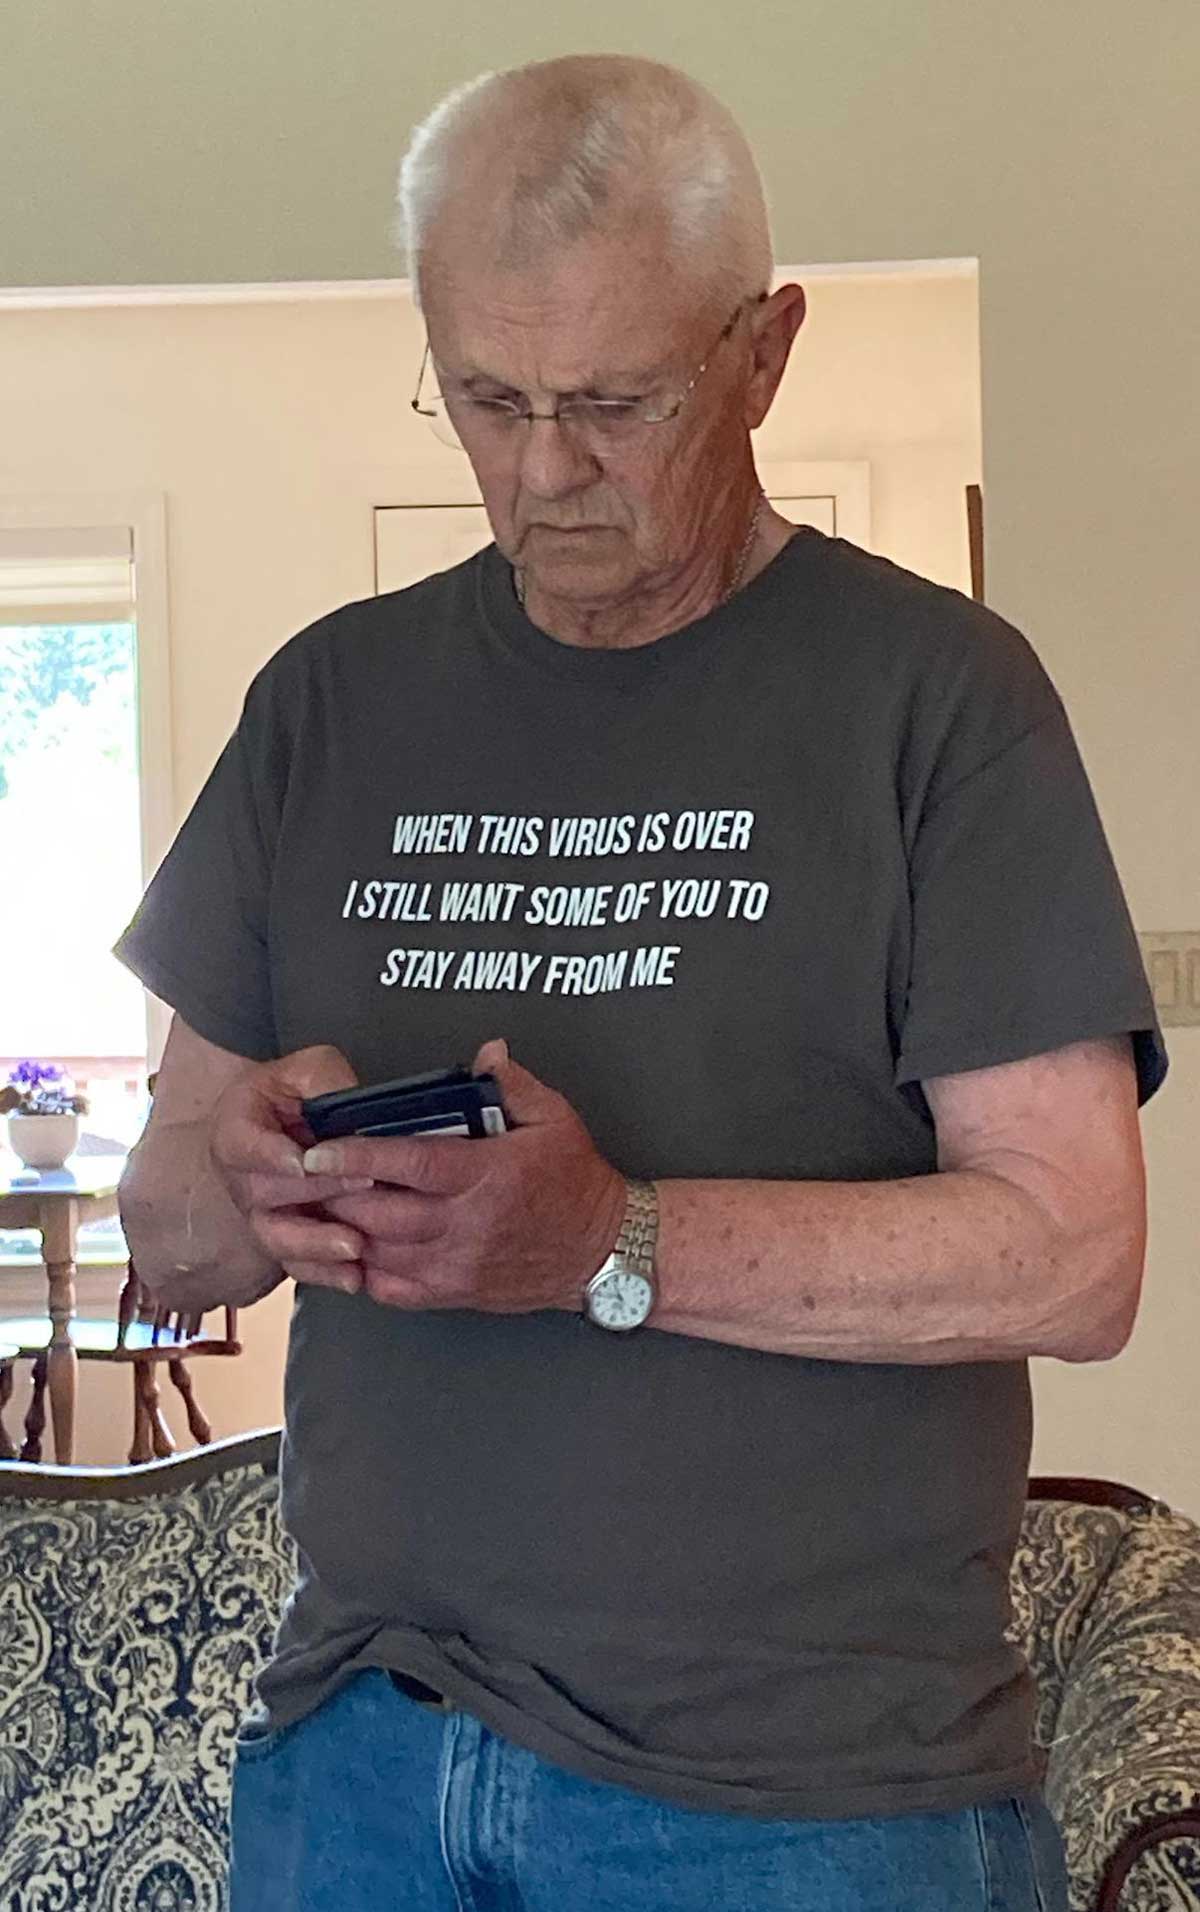 Got to see my 82 year old grandfather today. He wore his finest shirt to celebrate the occasion